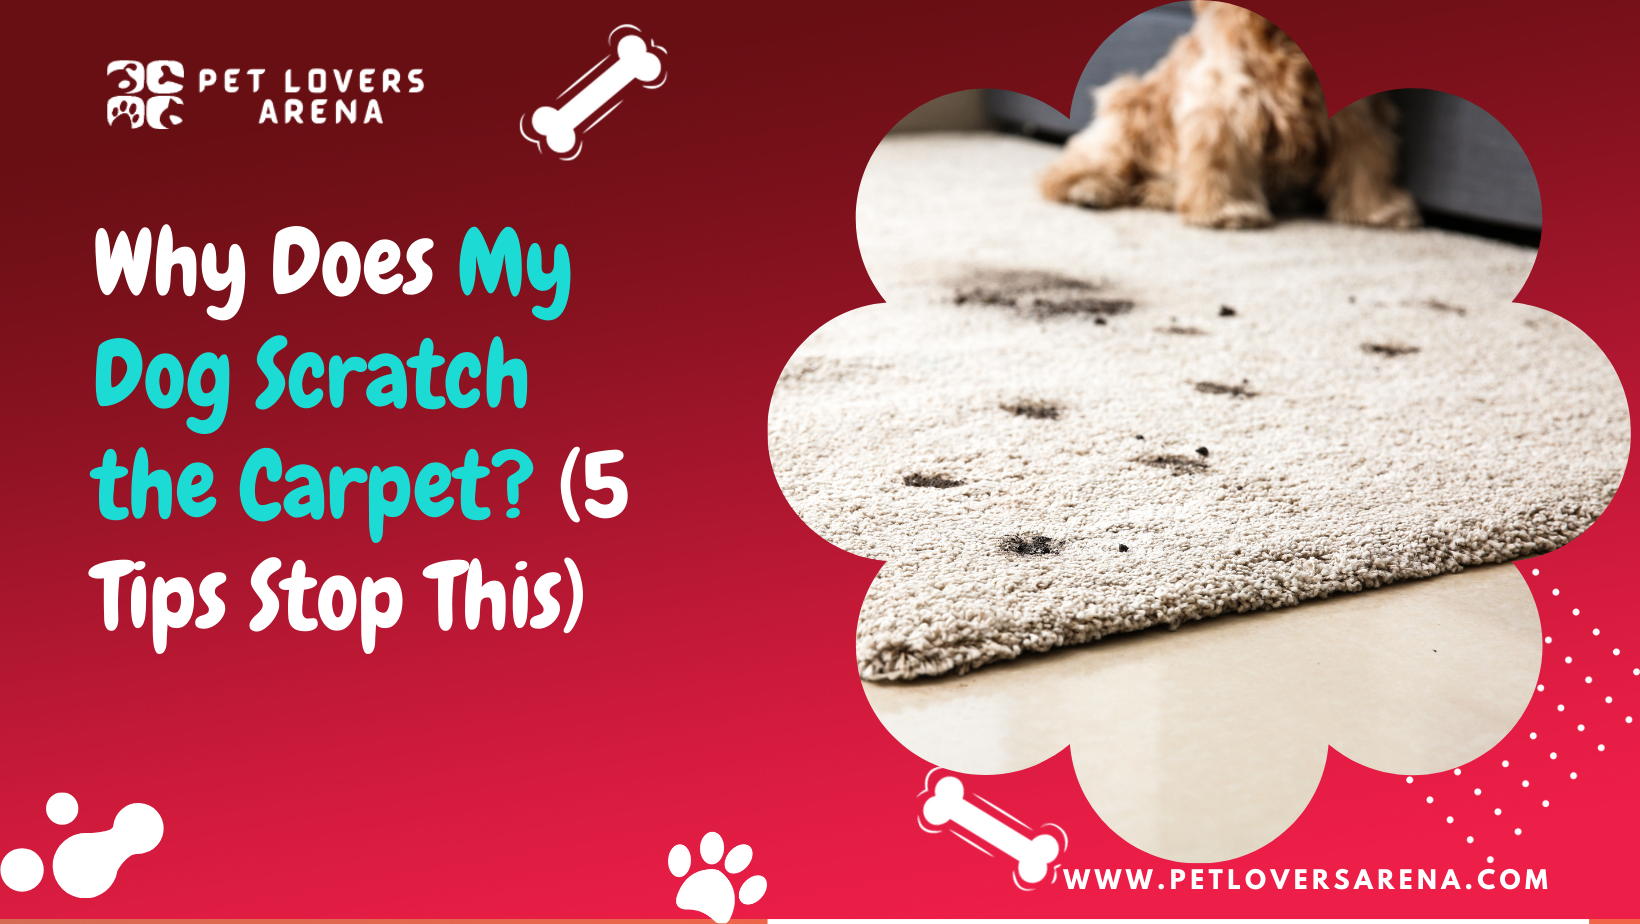 Why Does My Dog Scratch the Carpet? (5 Tips Stop This)